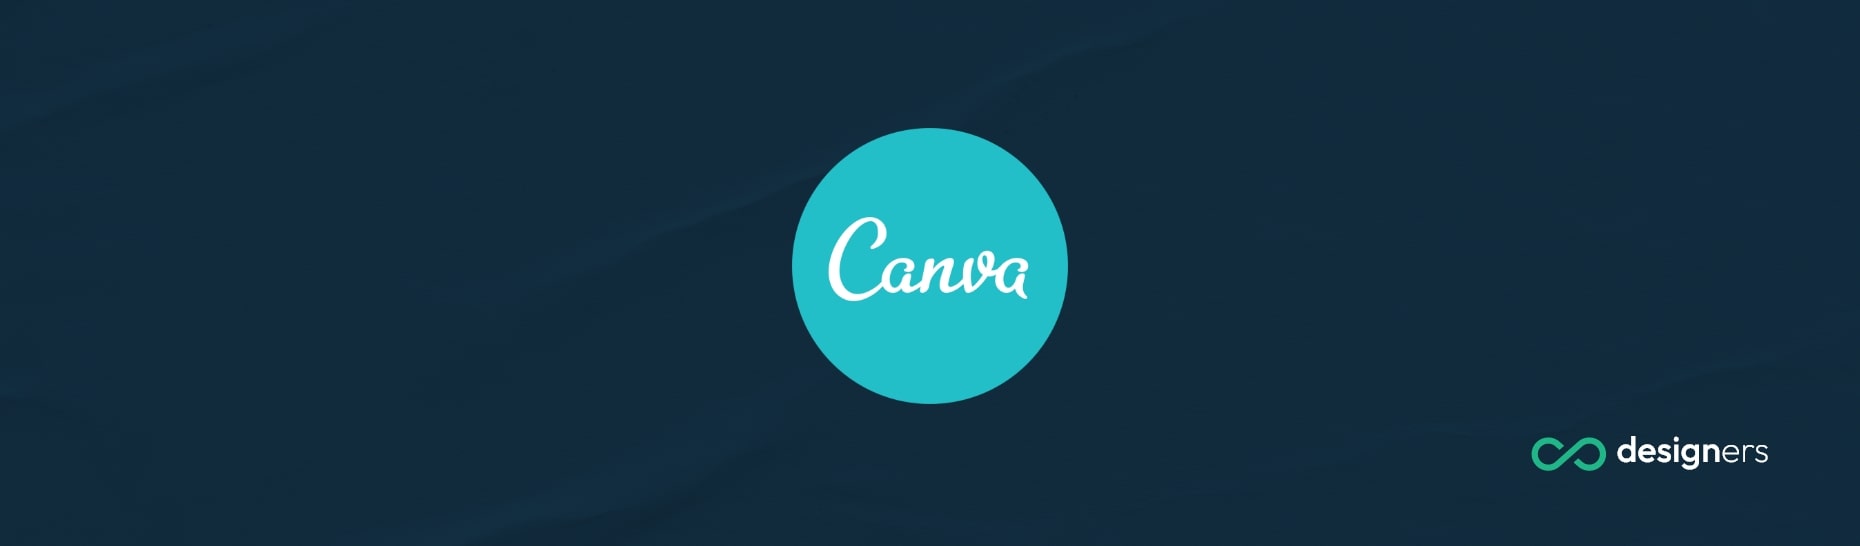 Does Canva Print Tote Bags?